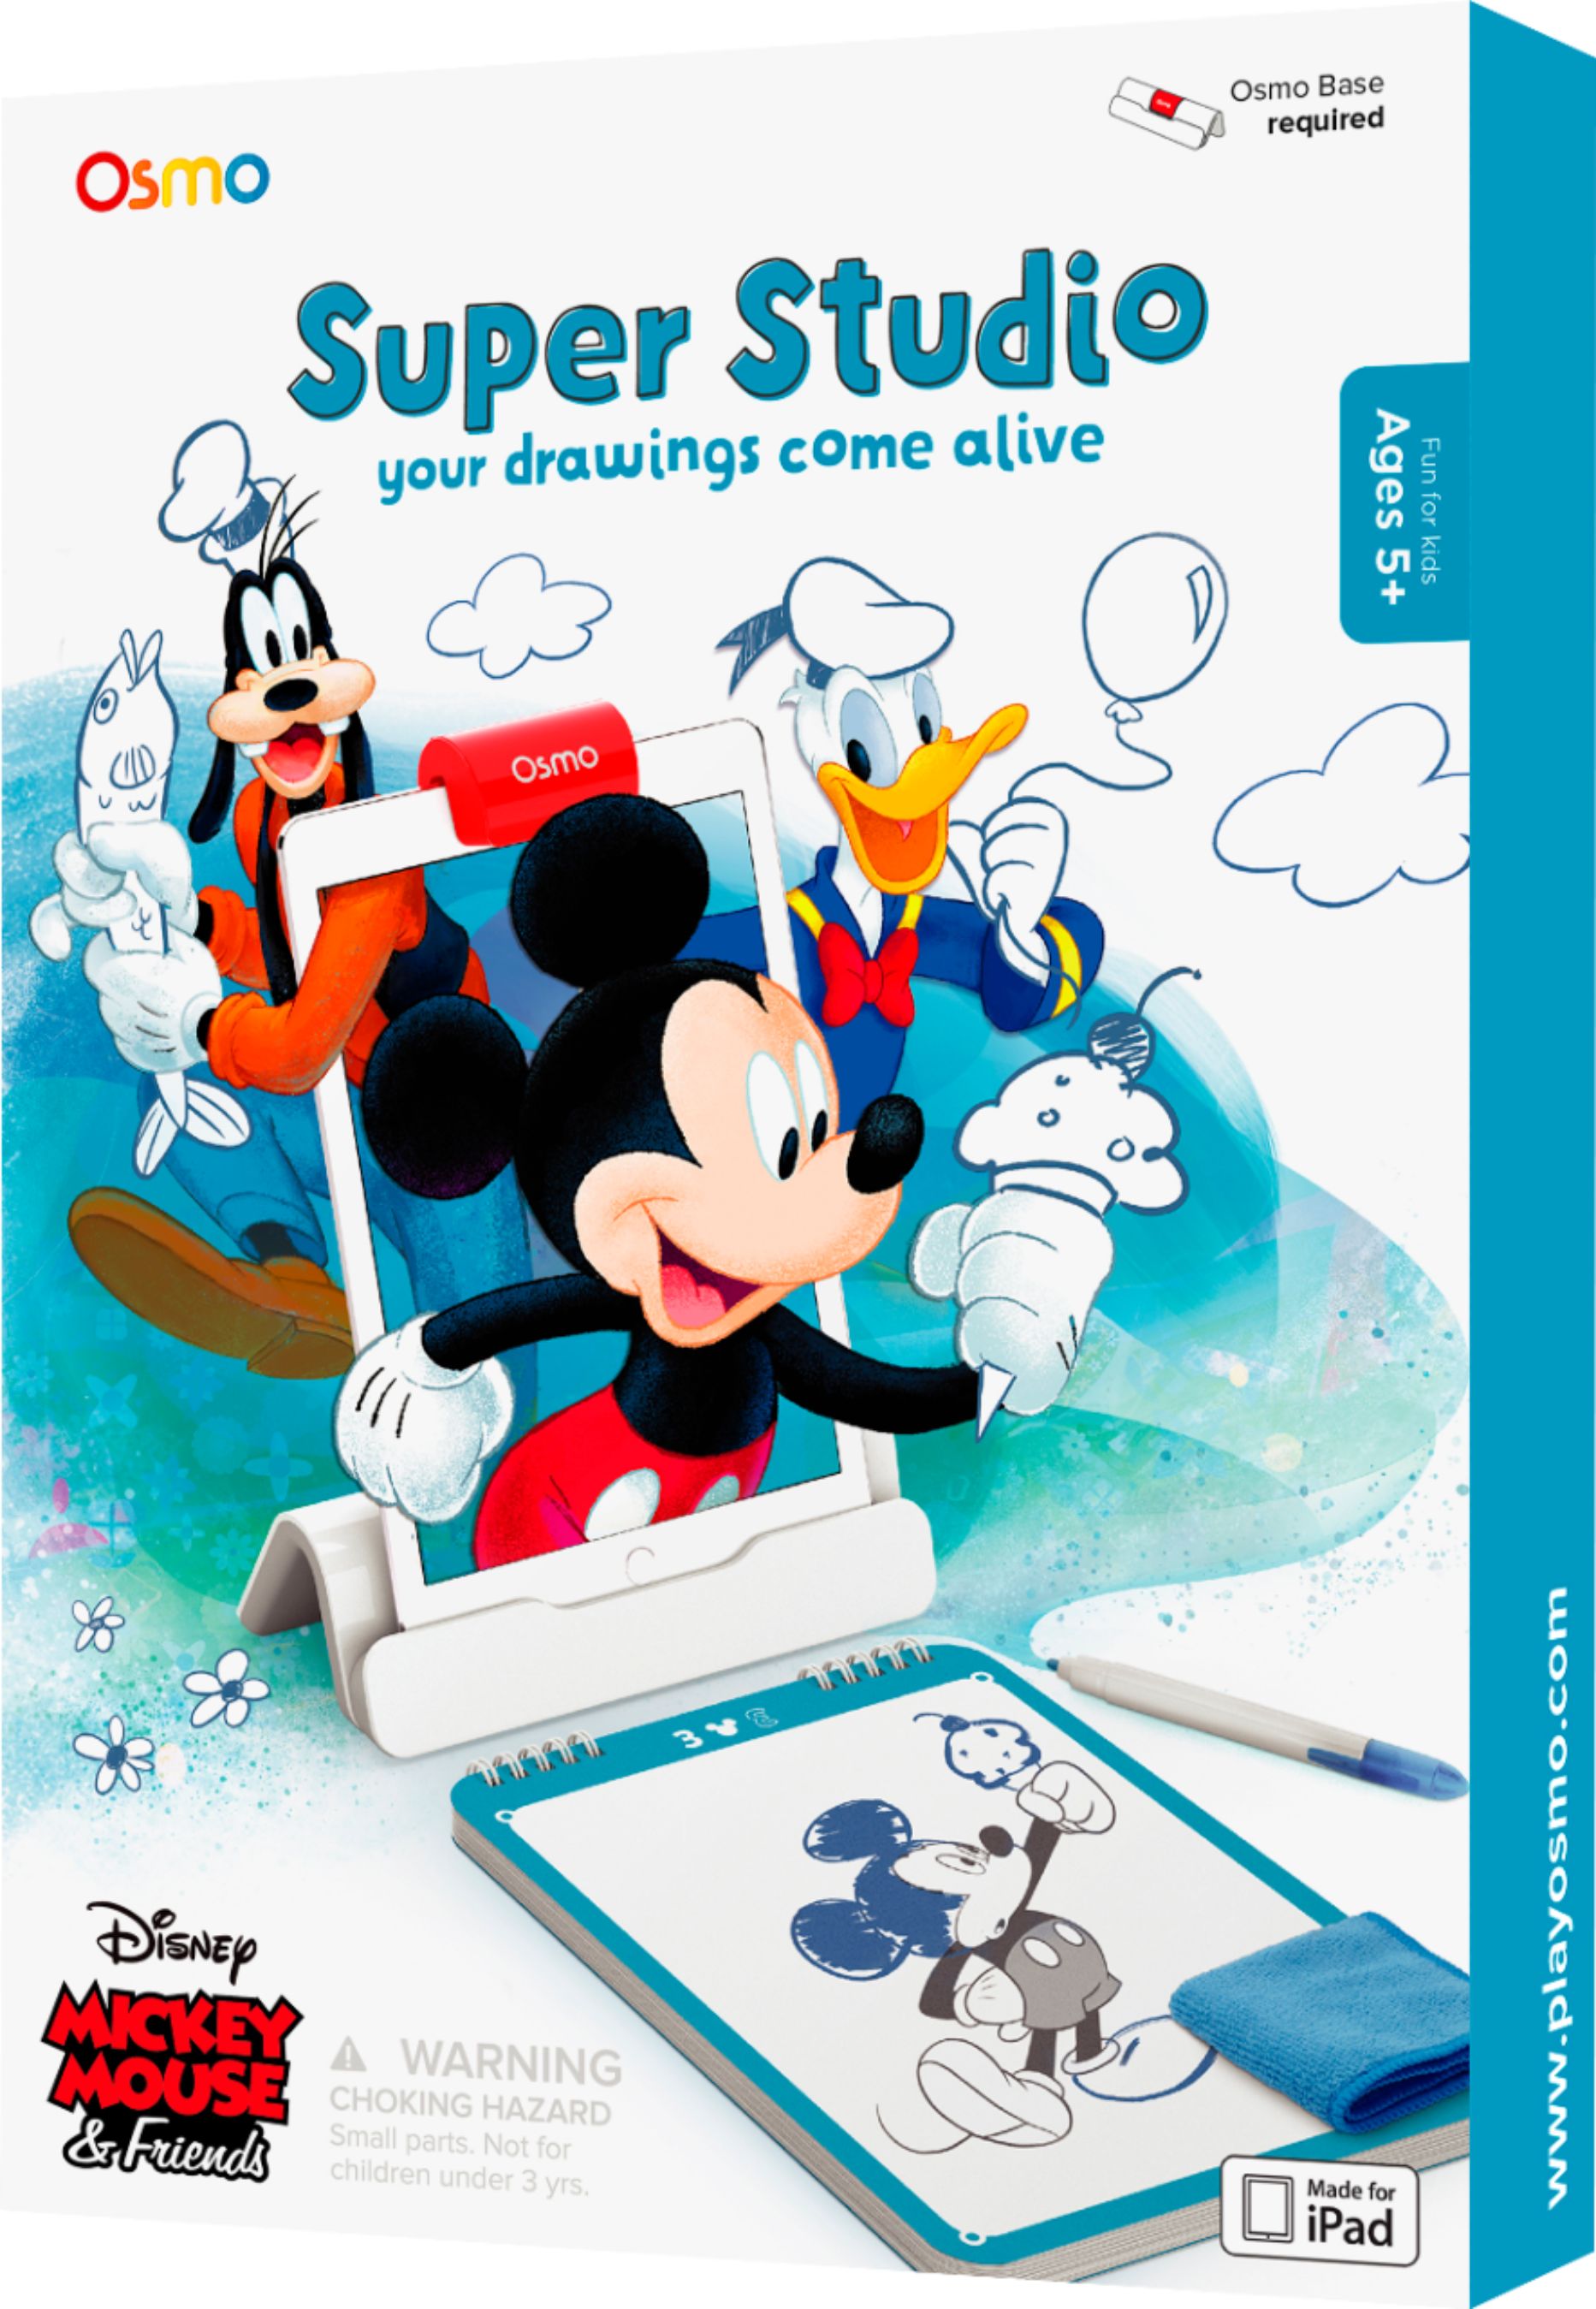 Left View: Osmo - Super Studio Disney Mickey Mouse & Friends Game